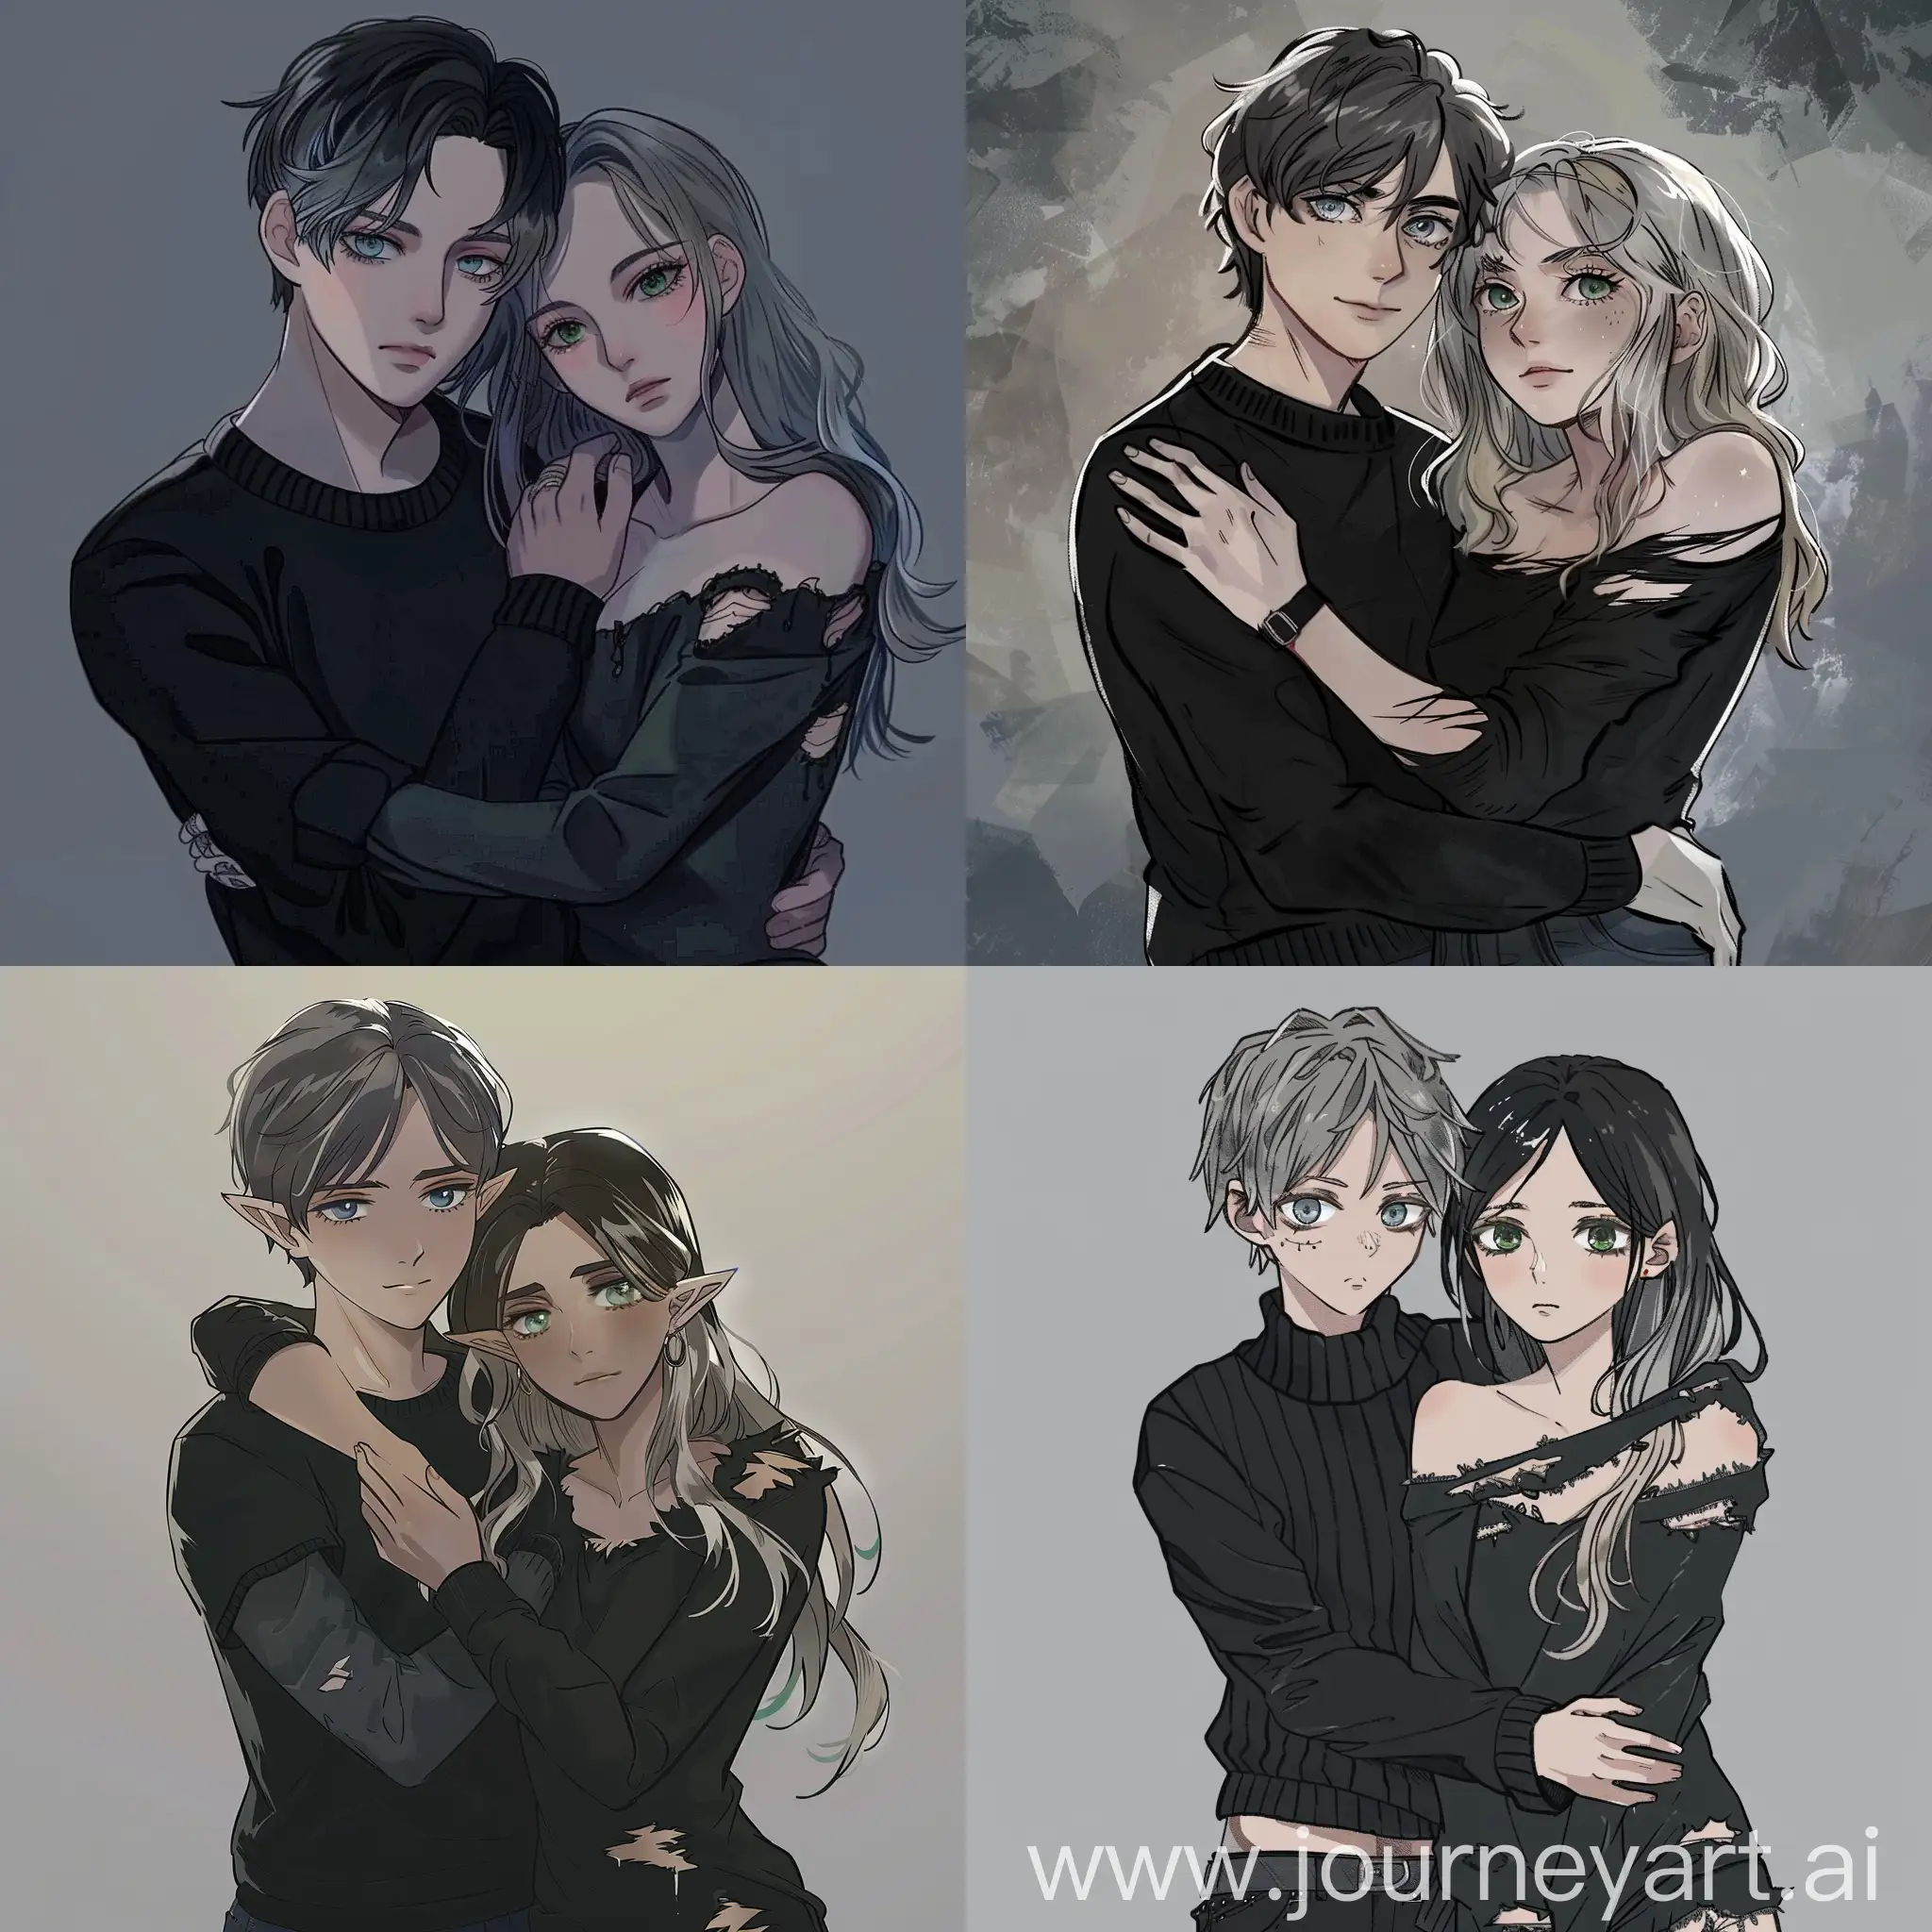 A light-skinned guy with short black hair, gray-blue eyes in a black sweater hugging a light-skinned girl with dark blonde long hair, green eyes in a black torn shirt in the style of Disney